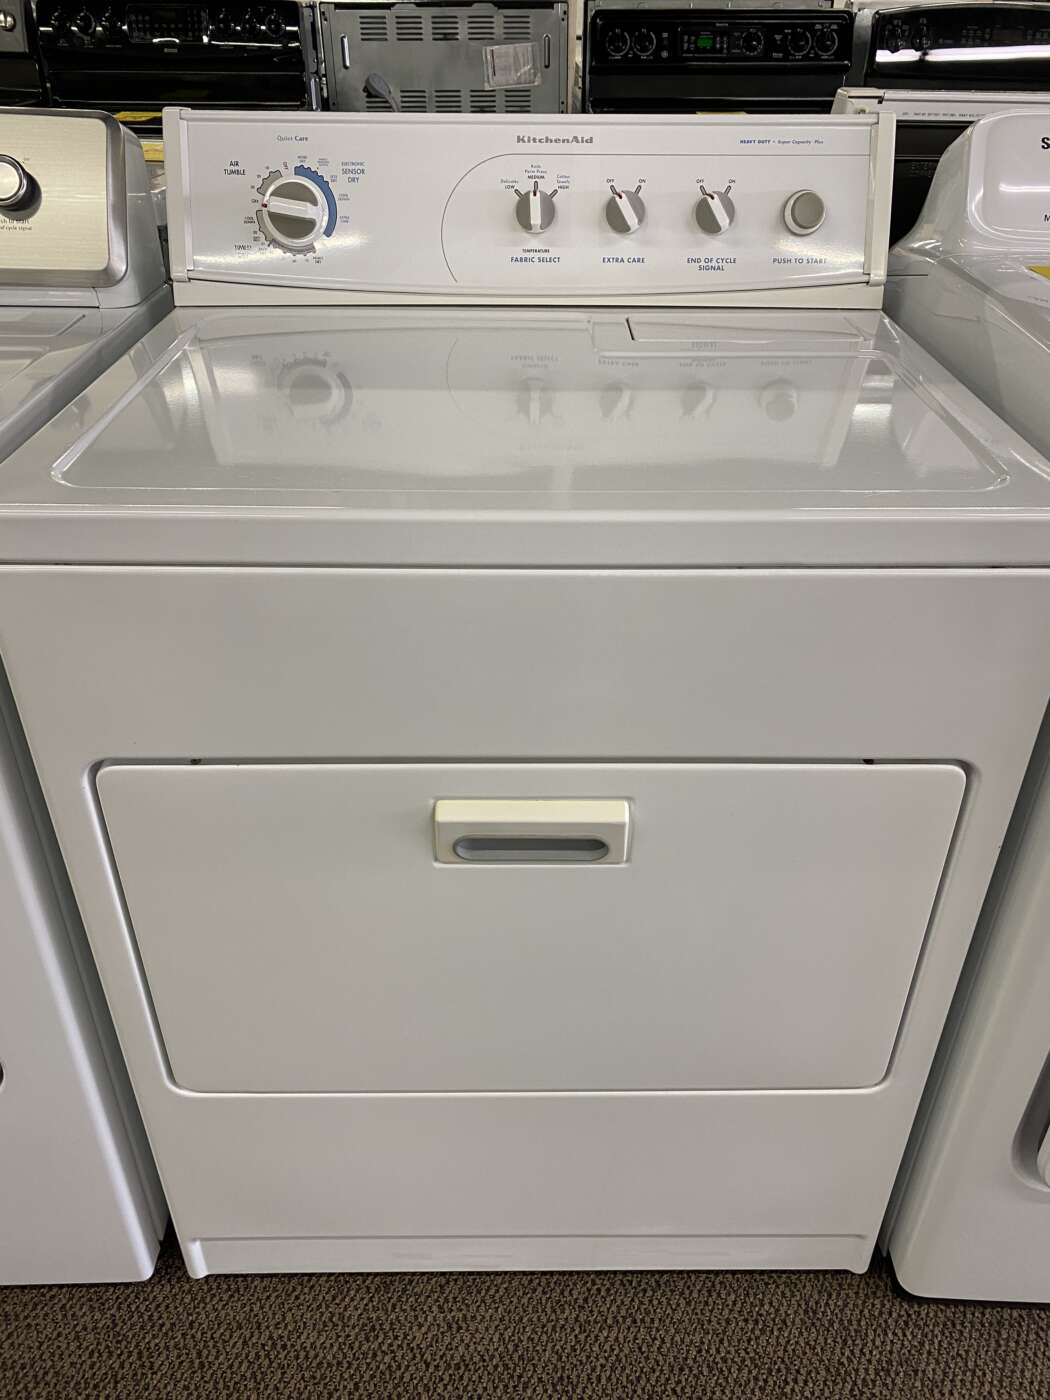 Reconditioned KITCHENAID 7.0 Cu. Ft. Electric Dryer – White